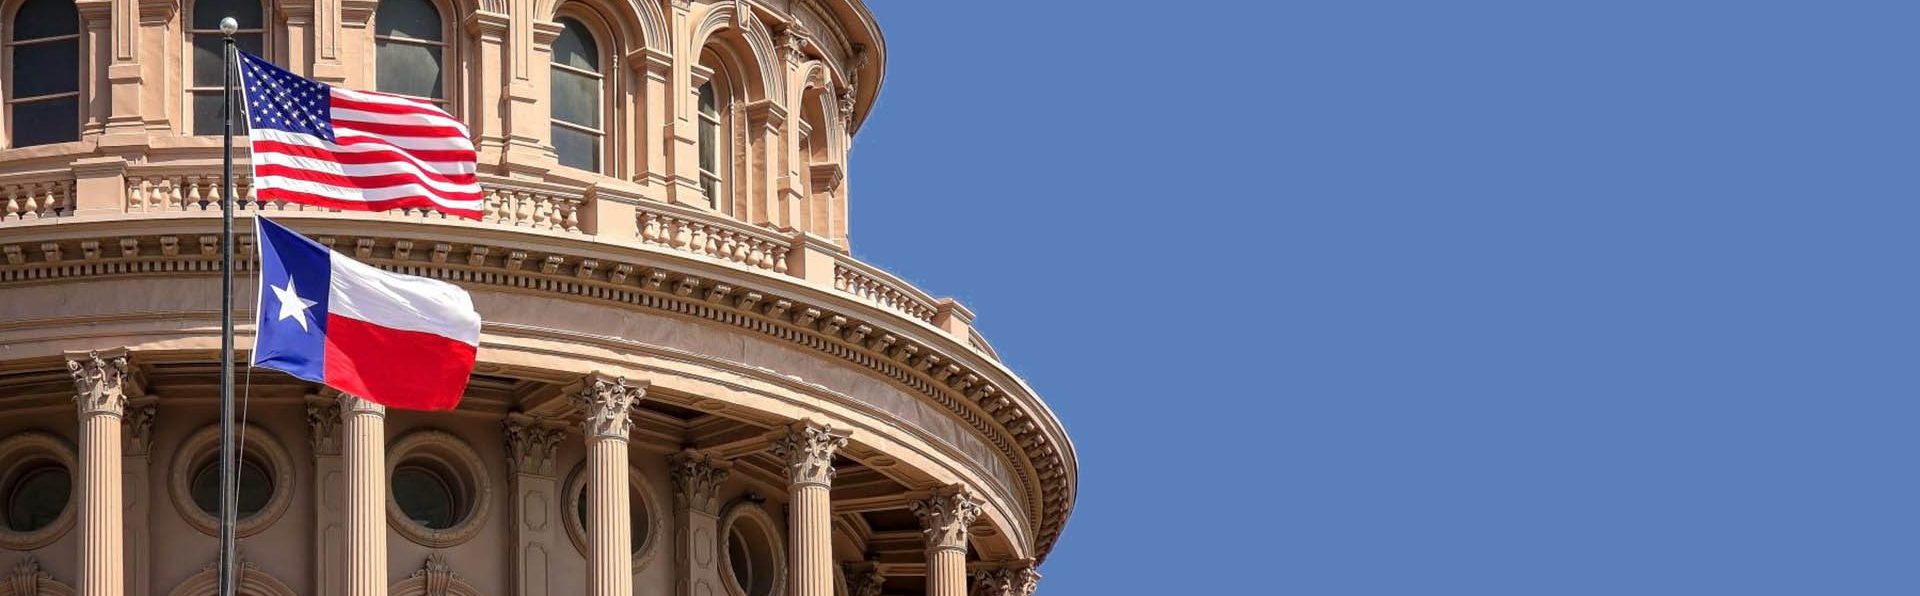 Texas capitol, where additional law is practiced.